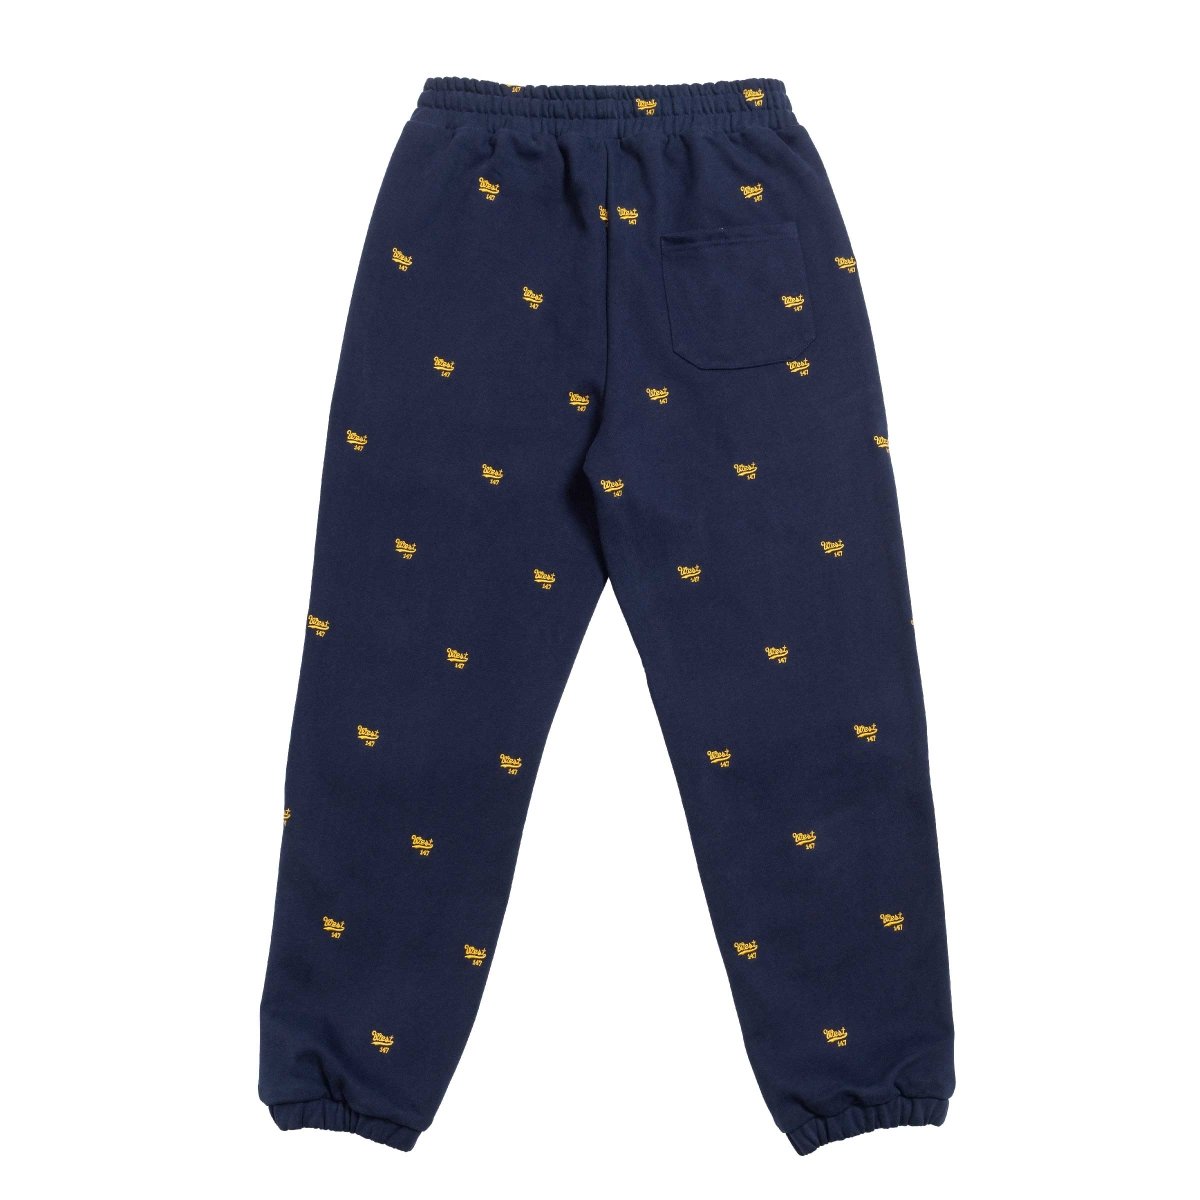 West NYC All Over Embroidery Pant Navy/Gold - 10032582 - West NYC